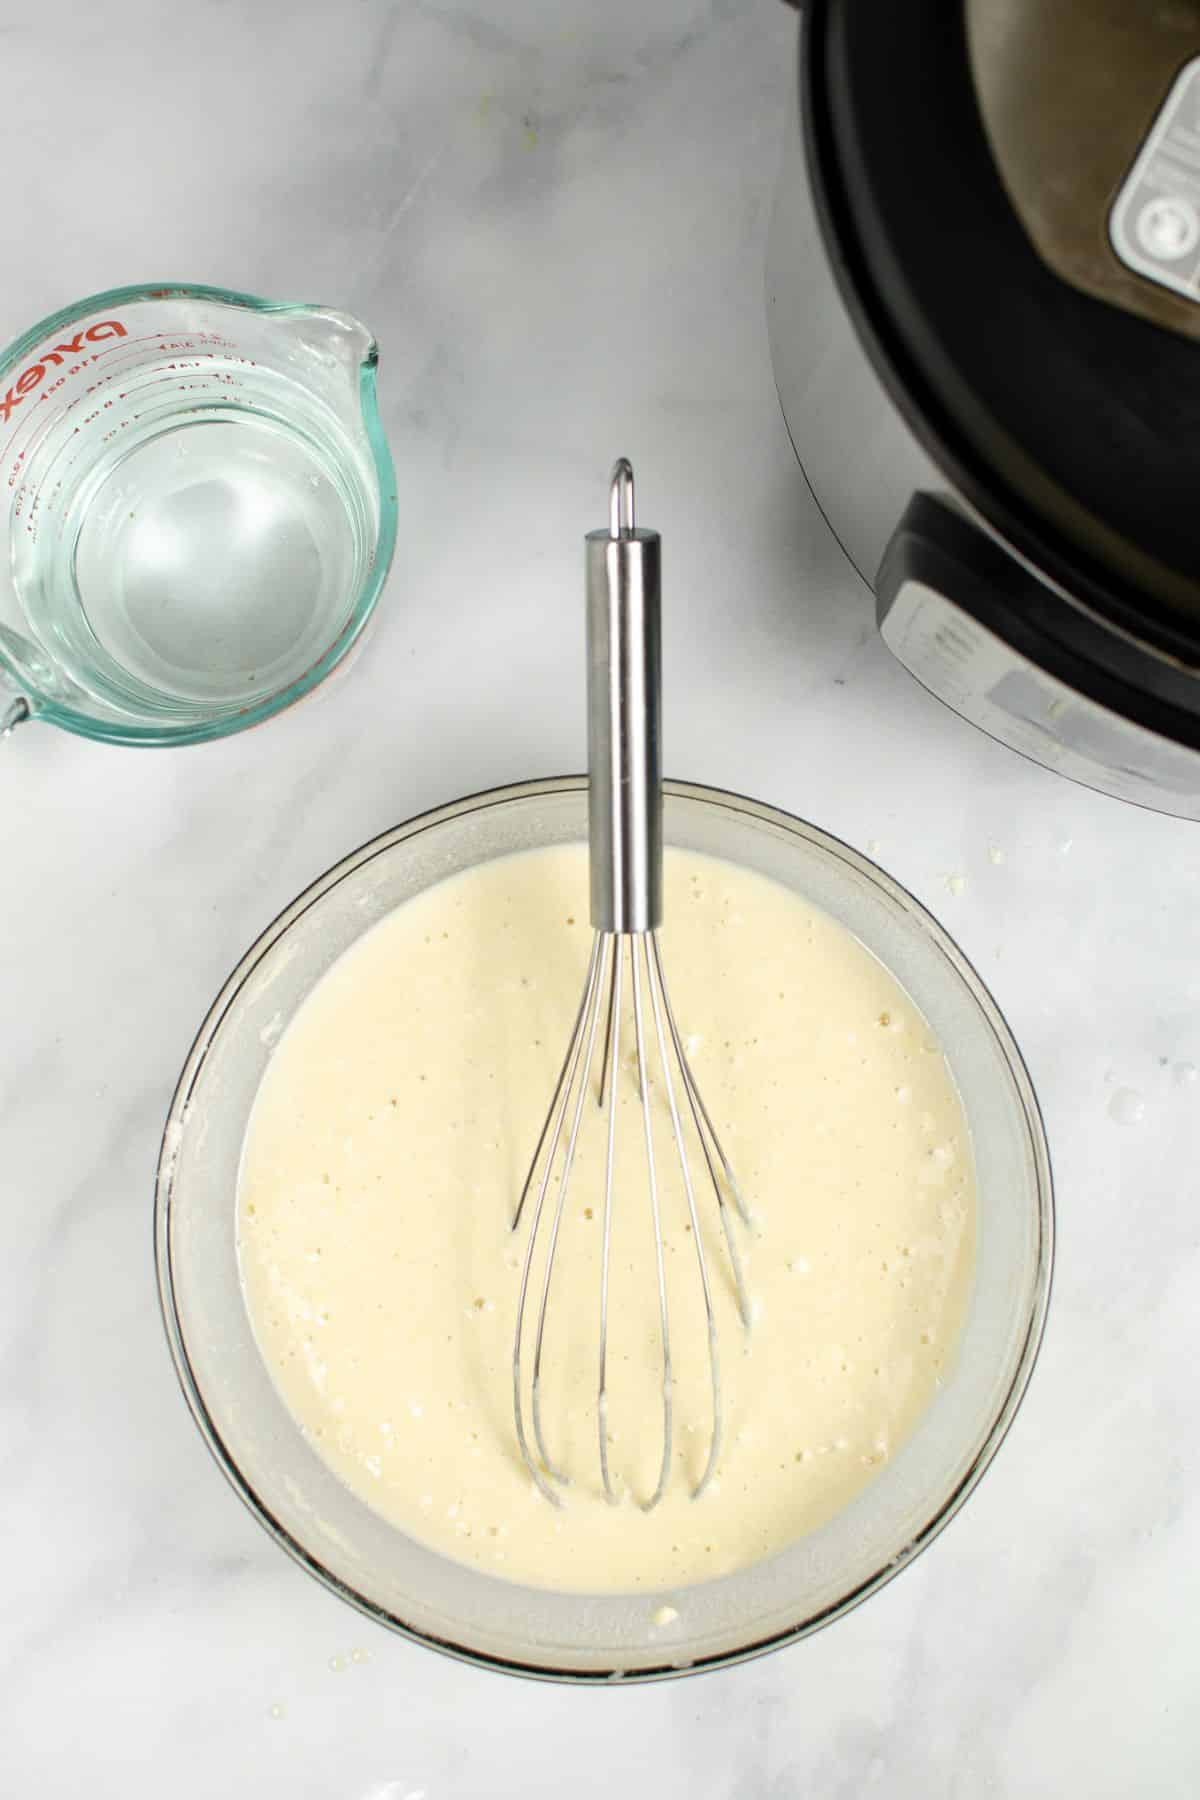 batter in a glass mixing bowl with a stainless steel whisk